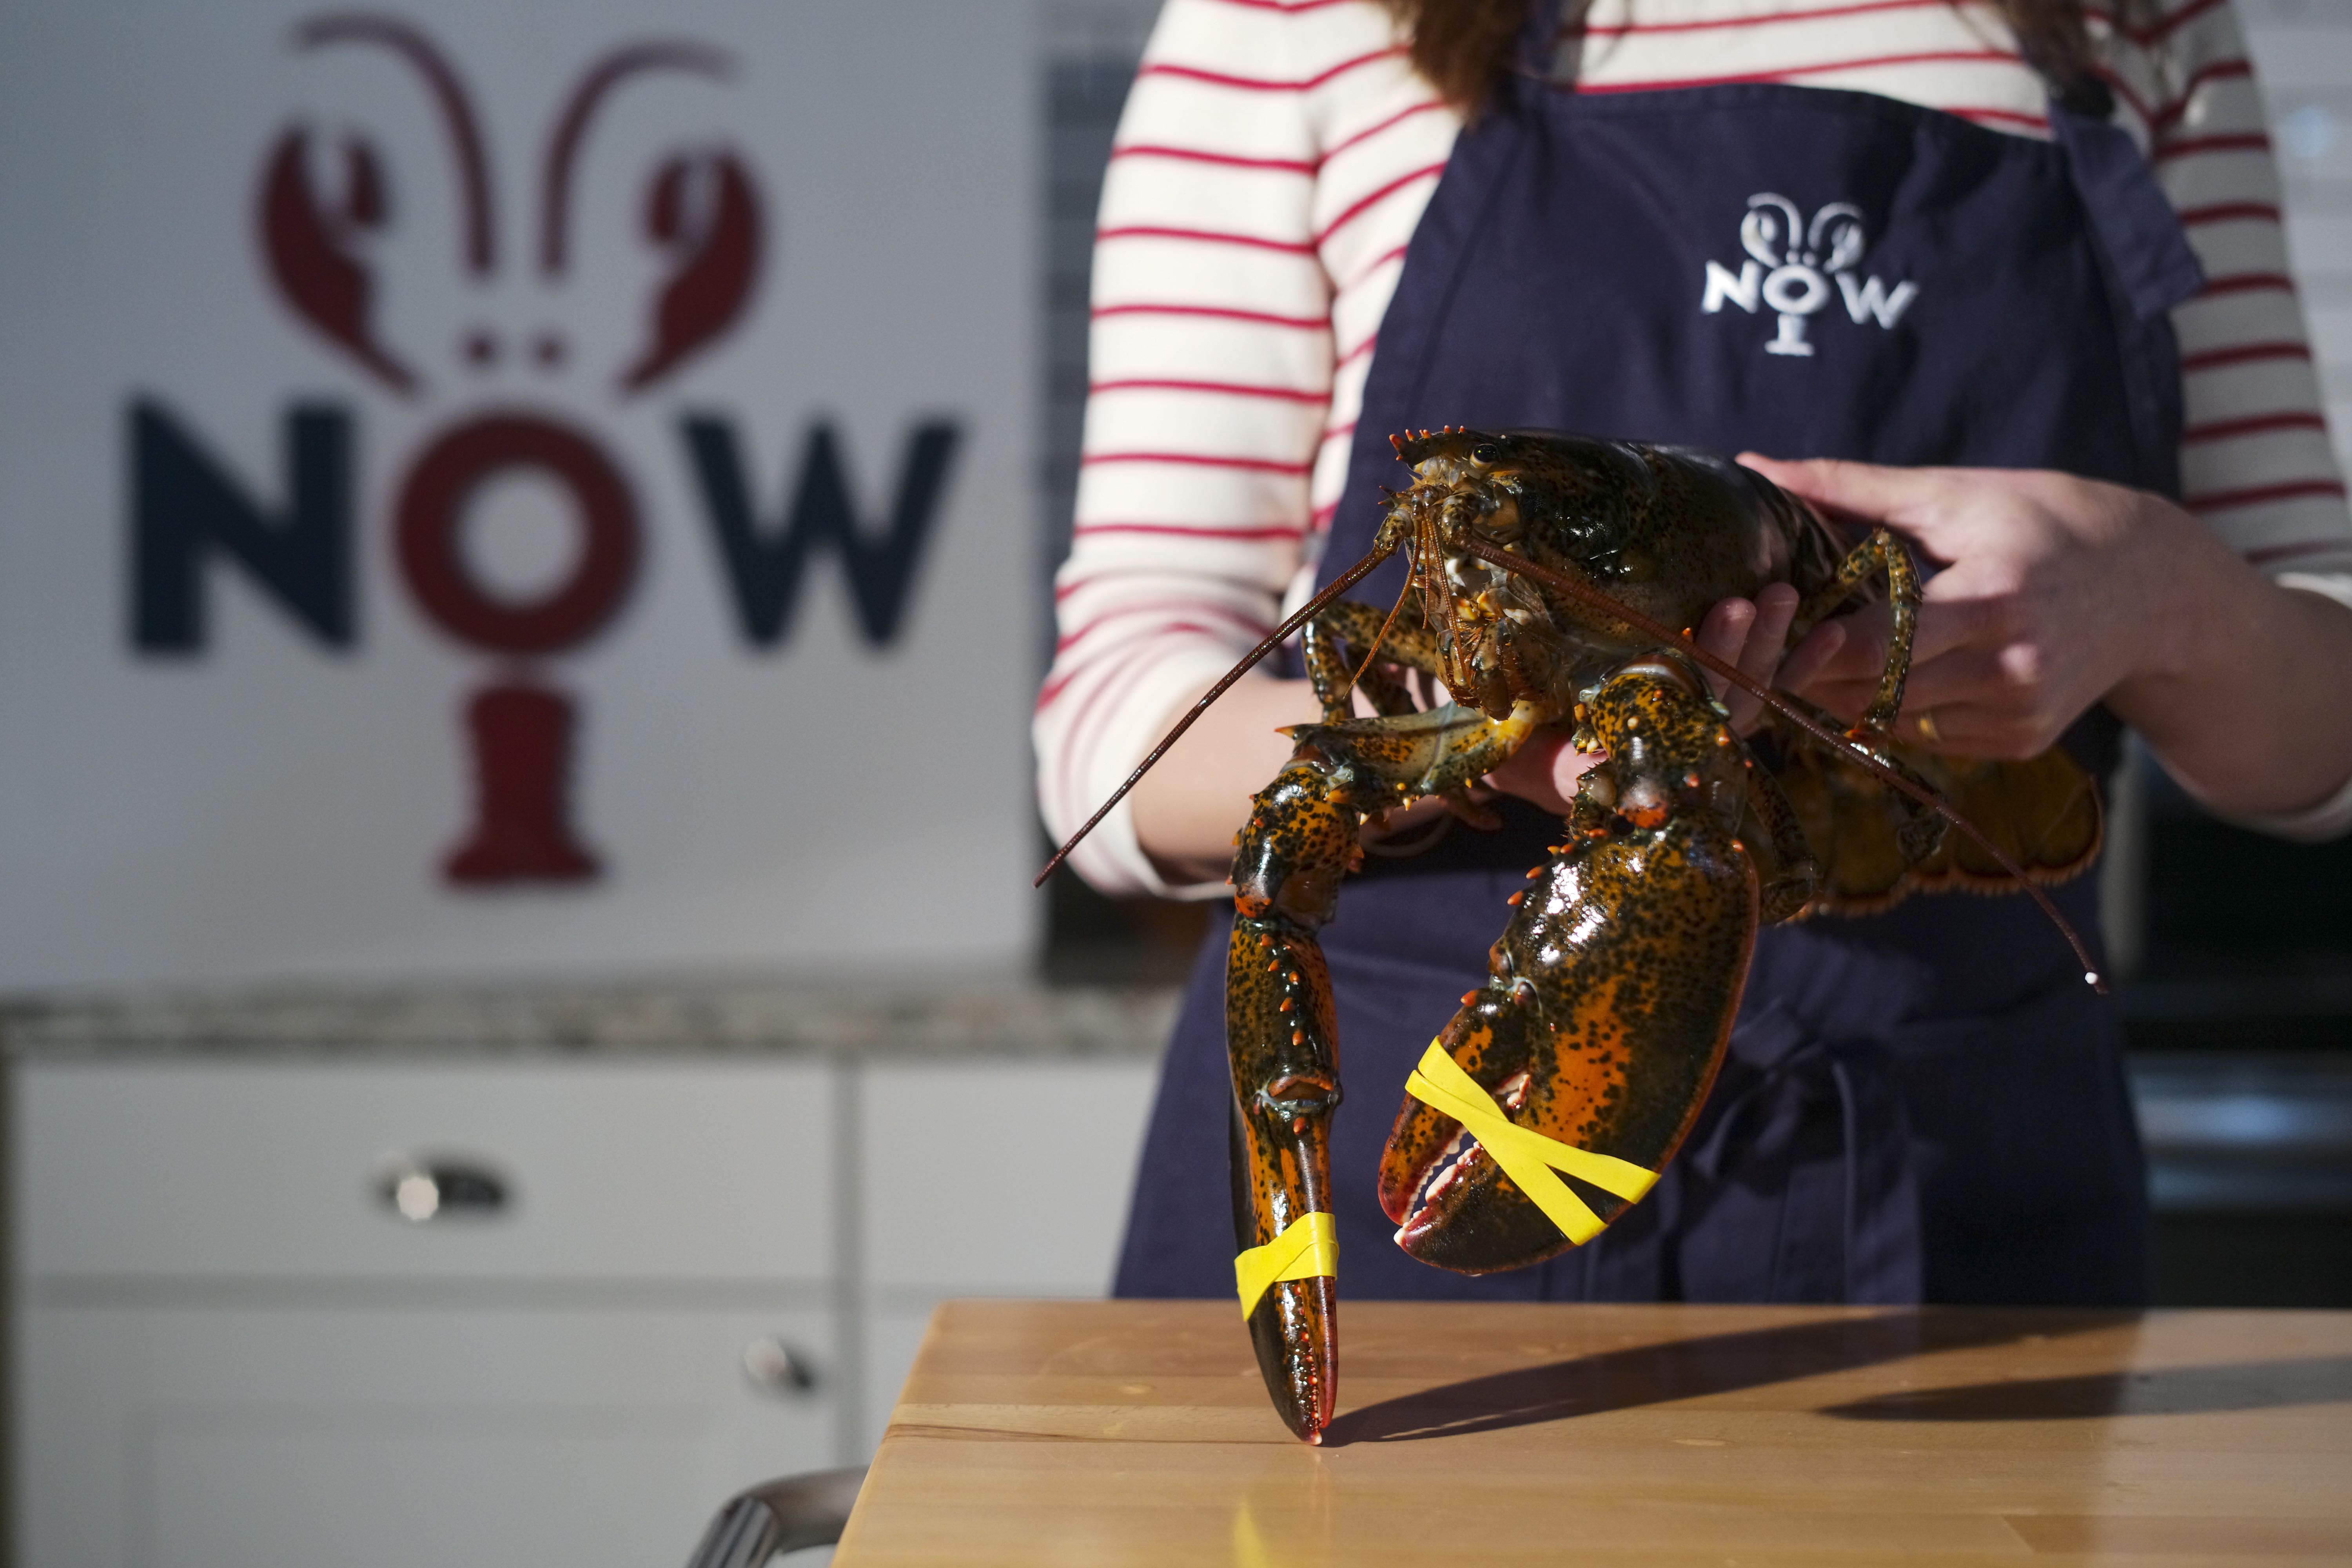 Maine Lobster Now Expands Online Menu With Additional Meat Options